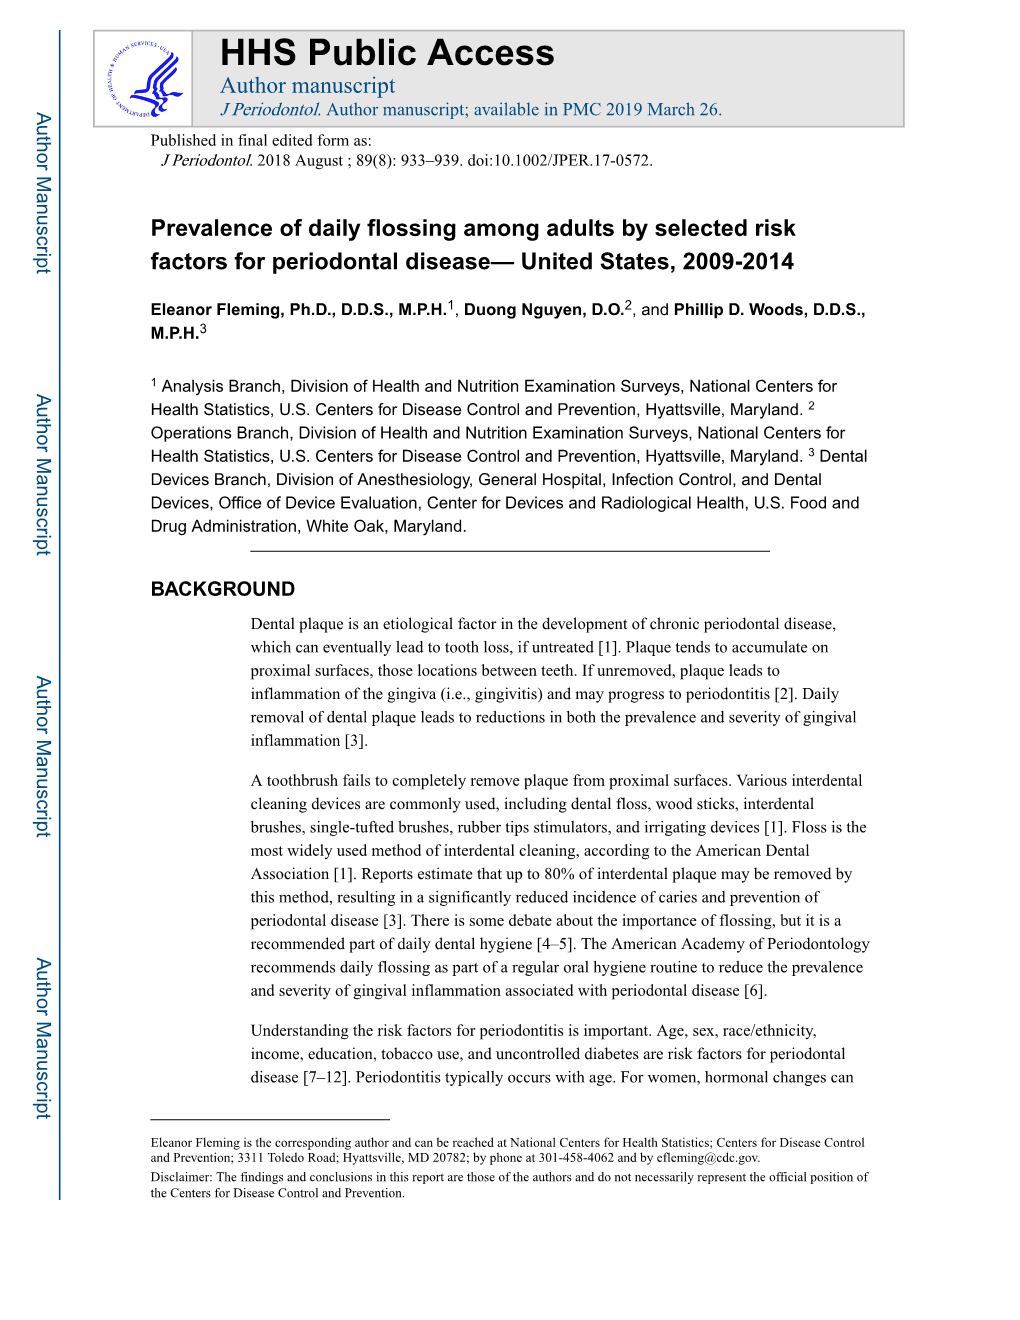 Prevalence of Daily Flossing Among Adults by Selected Risk Factors for Periodontal Disease— United States, 2009-2014